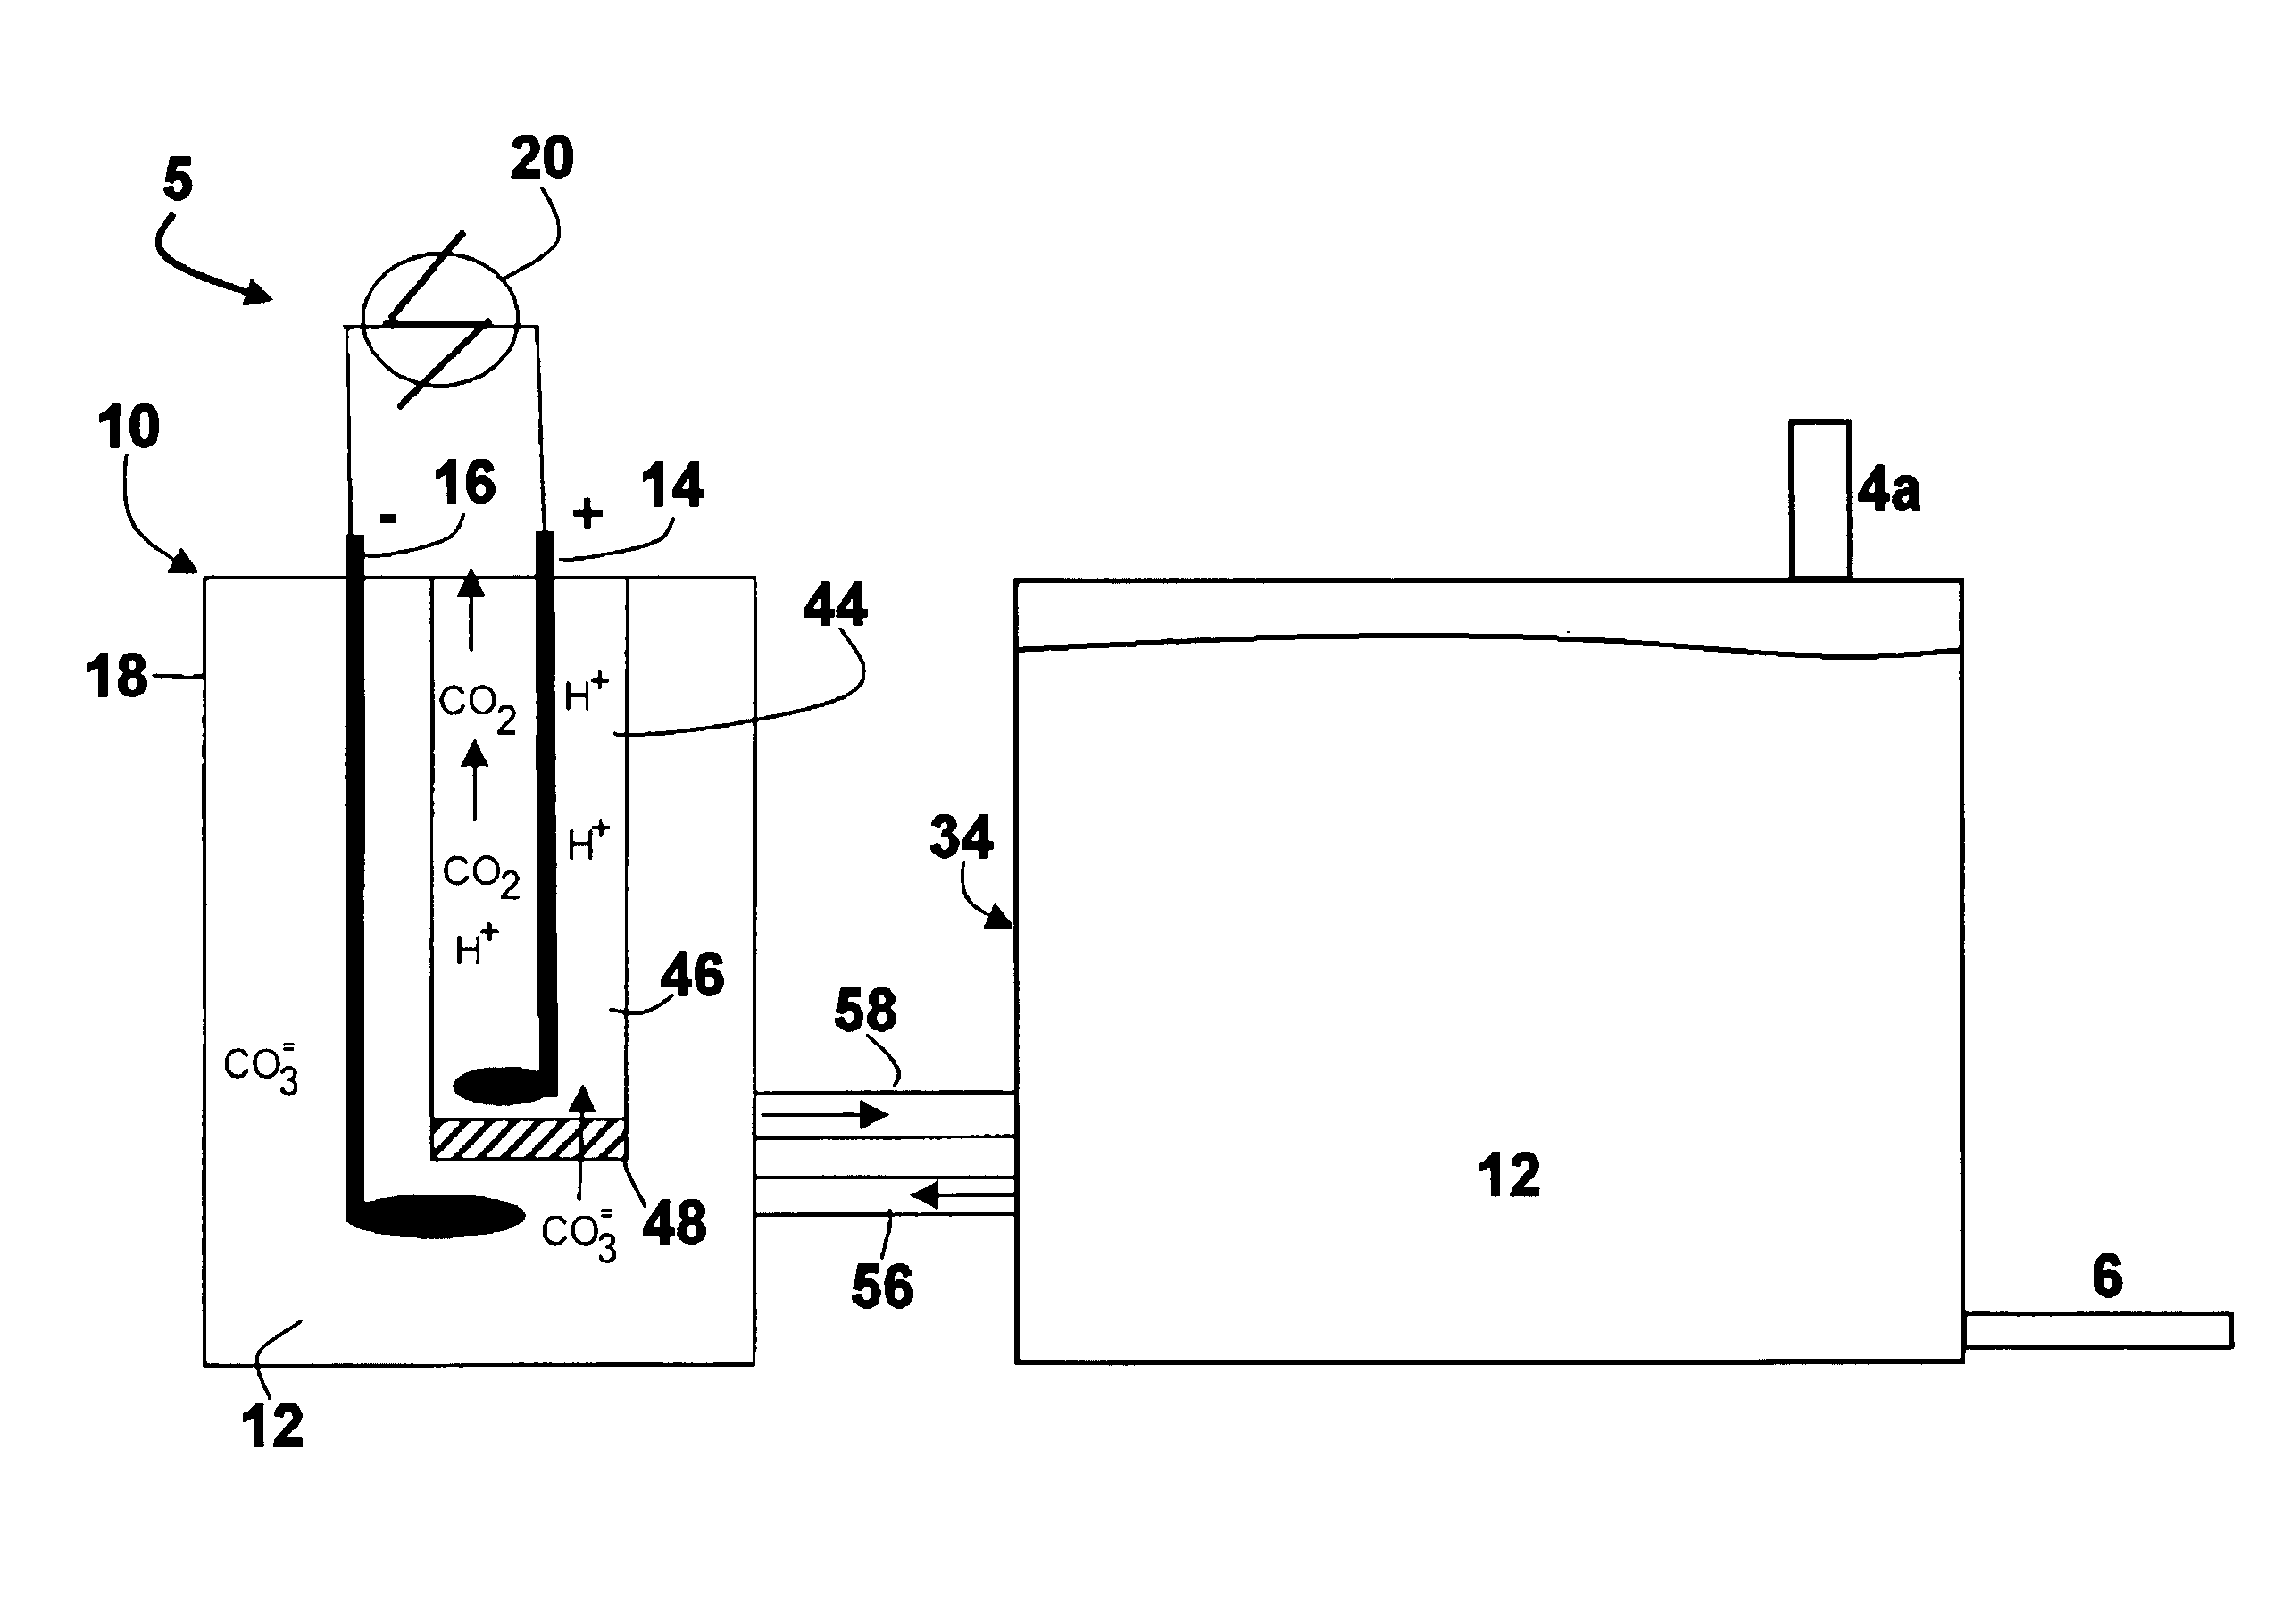 Remote emergency power unit having electrochemically regenerated carbon dioxide scrubber